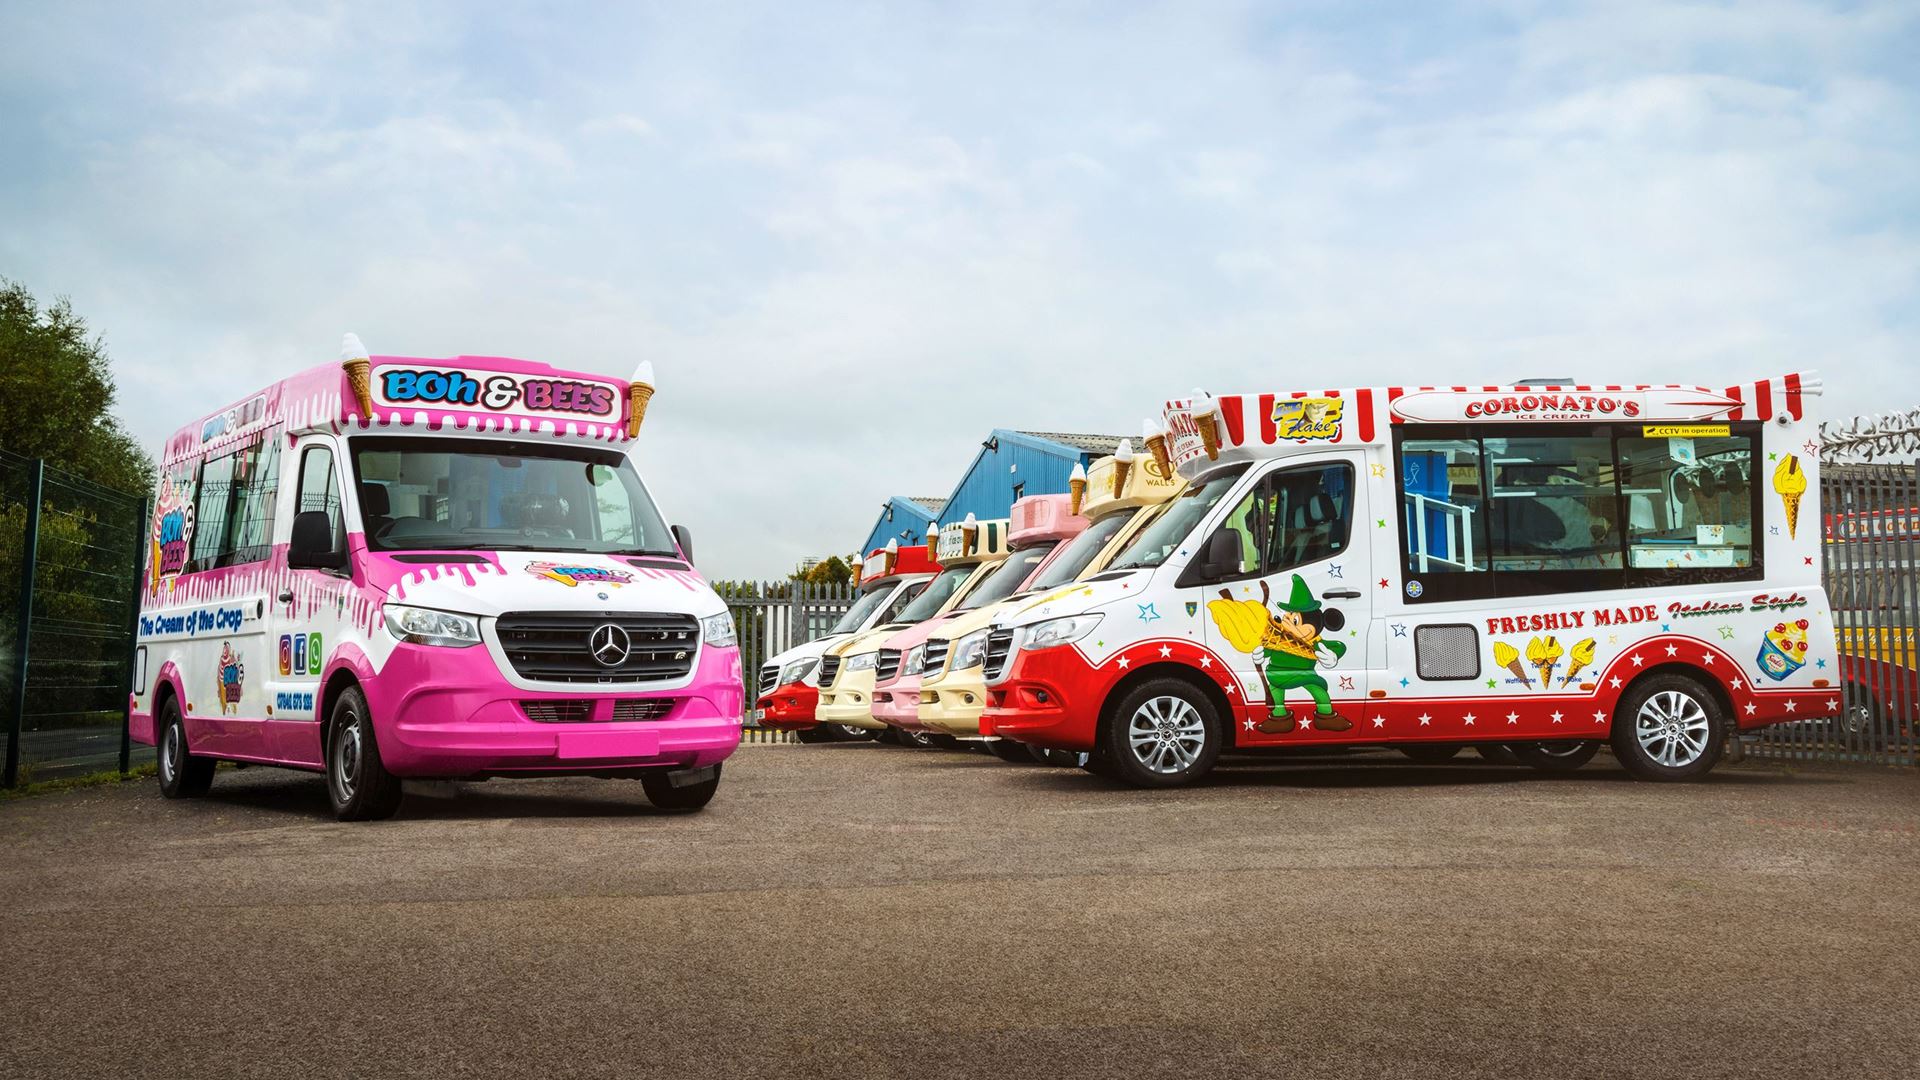 whitby ice cream vans for sale